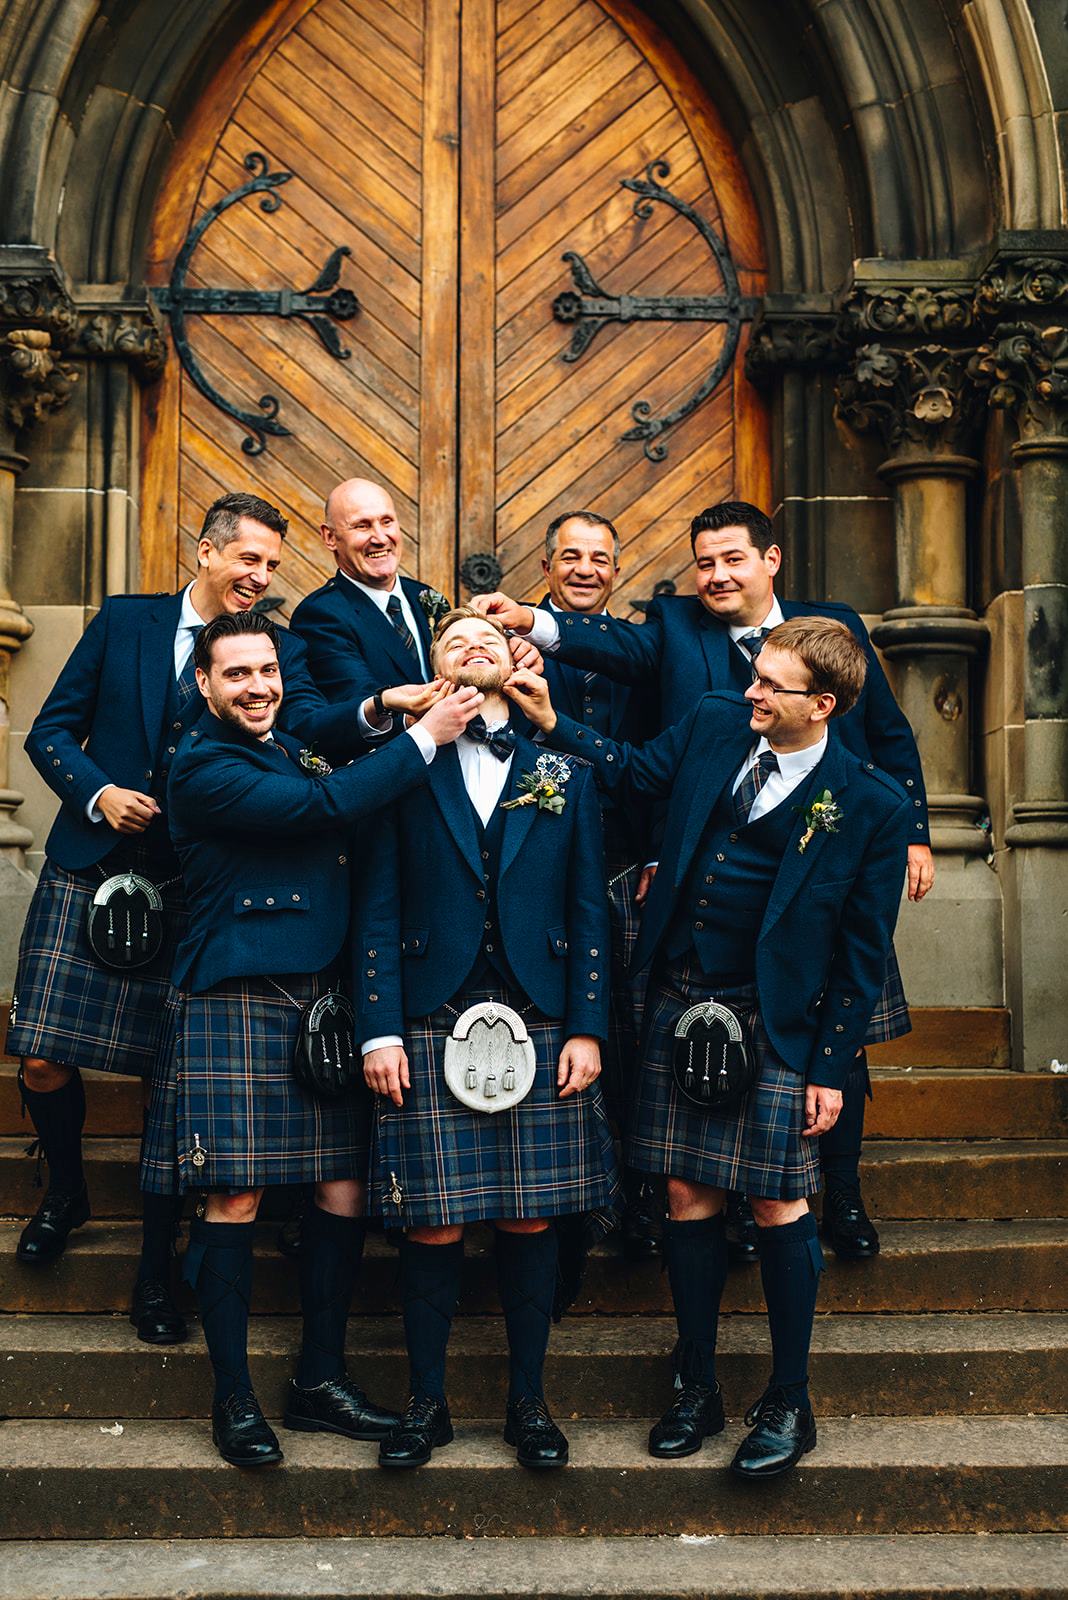 Grooms party in full kilt outfits